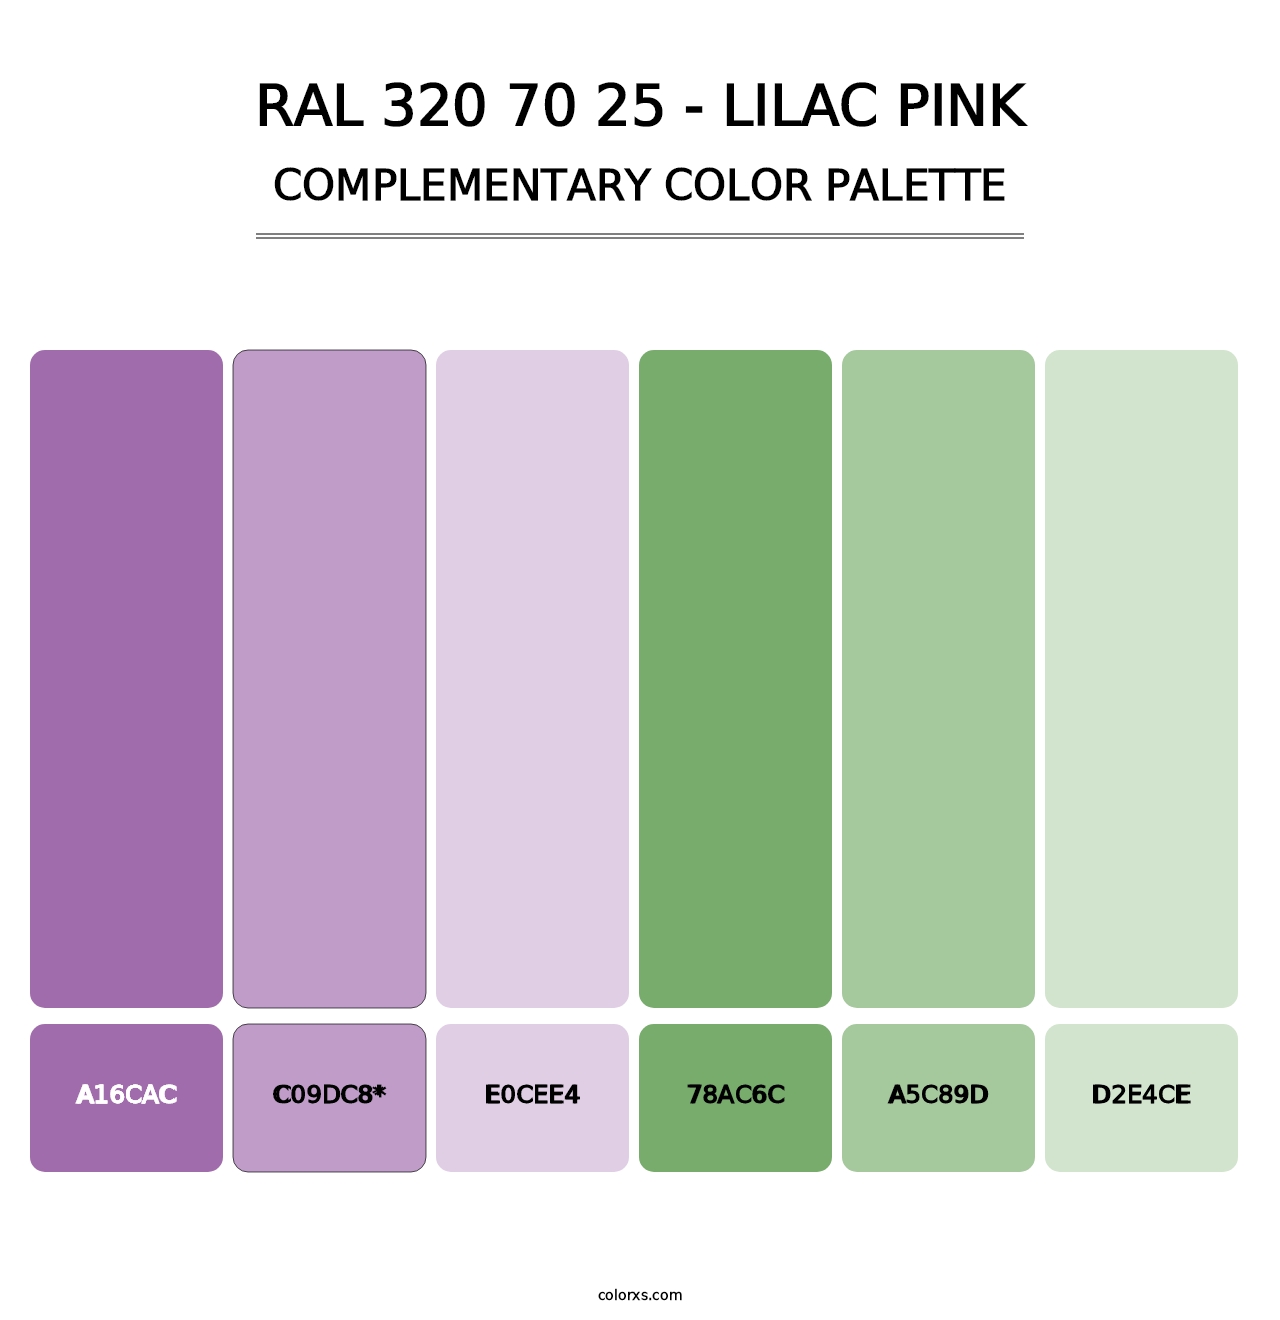 RAL 320 70 25 - Lilac Pink - Complementary Color Palette